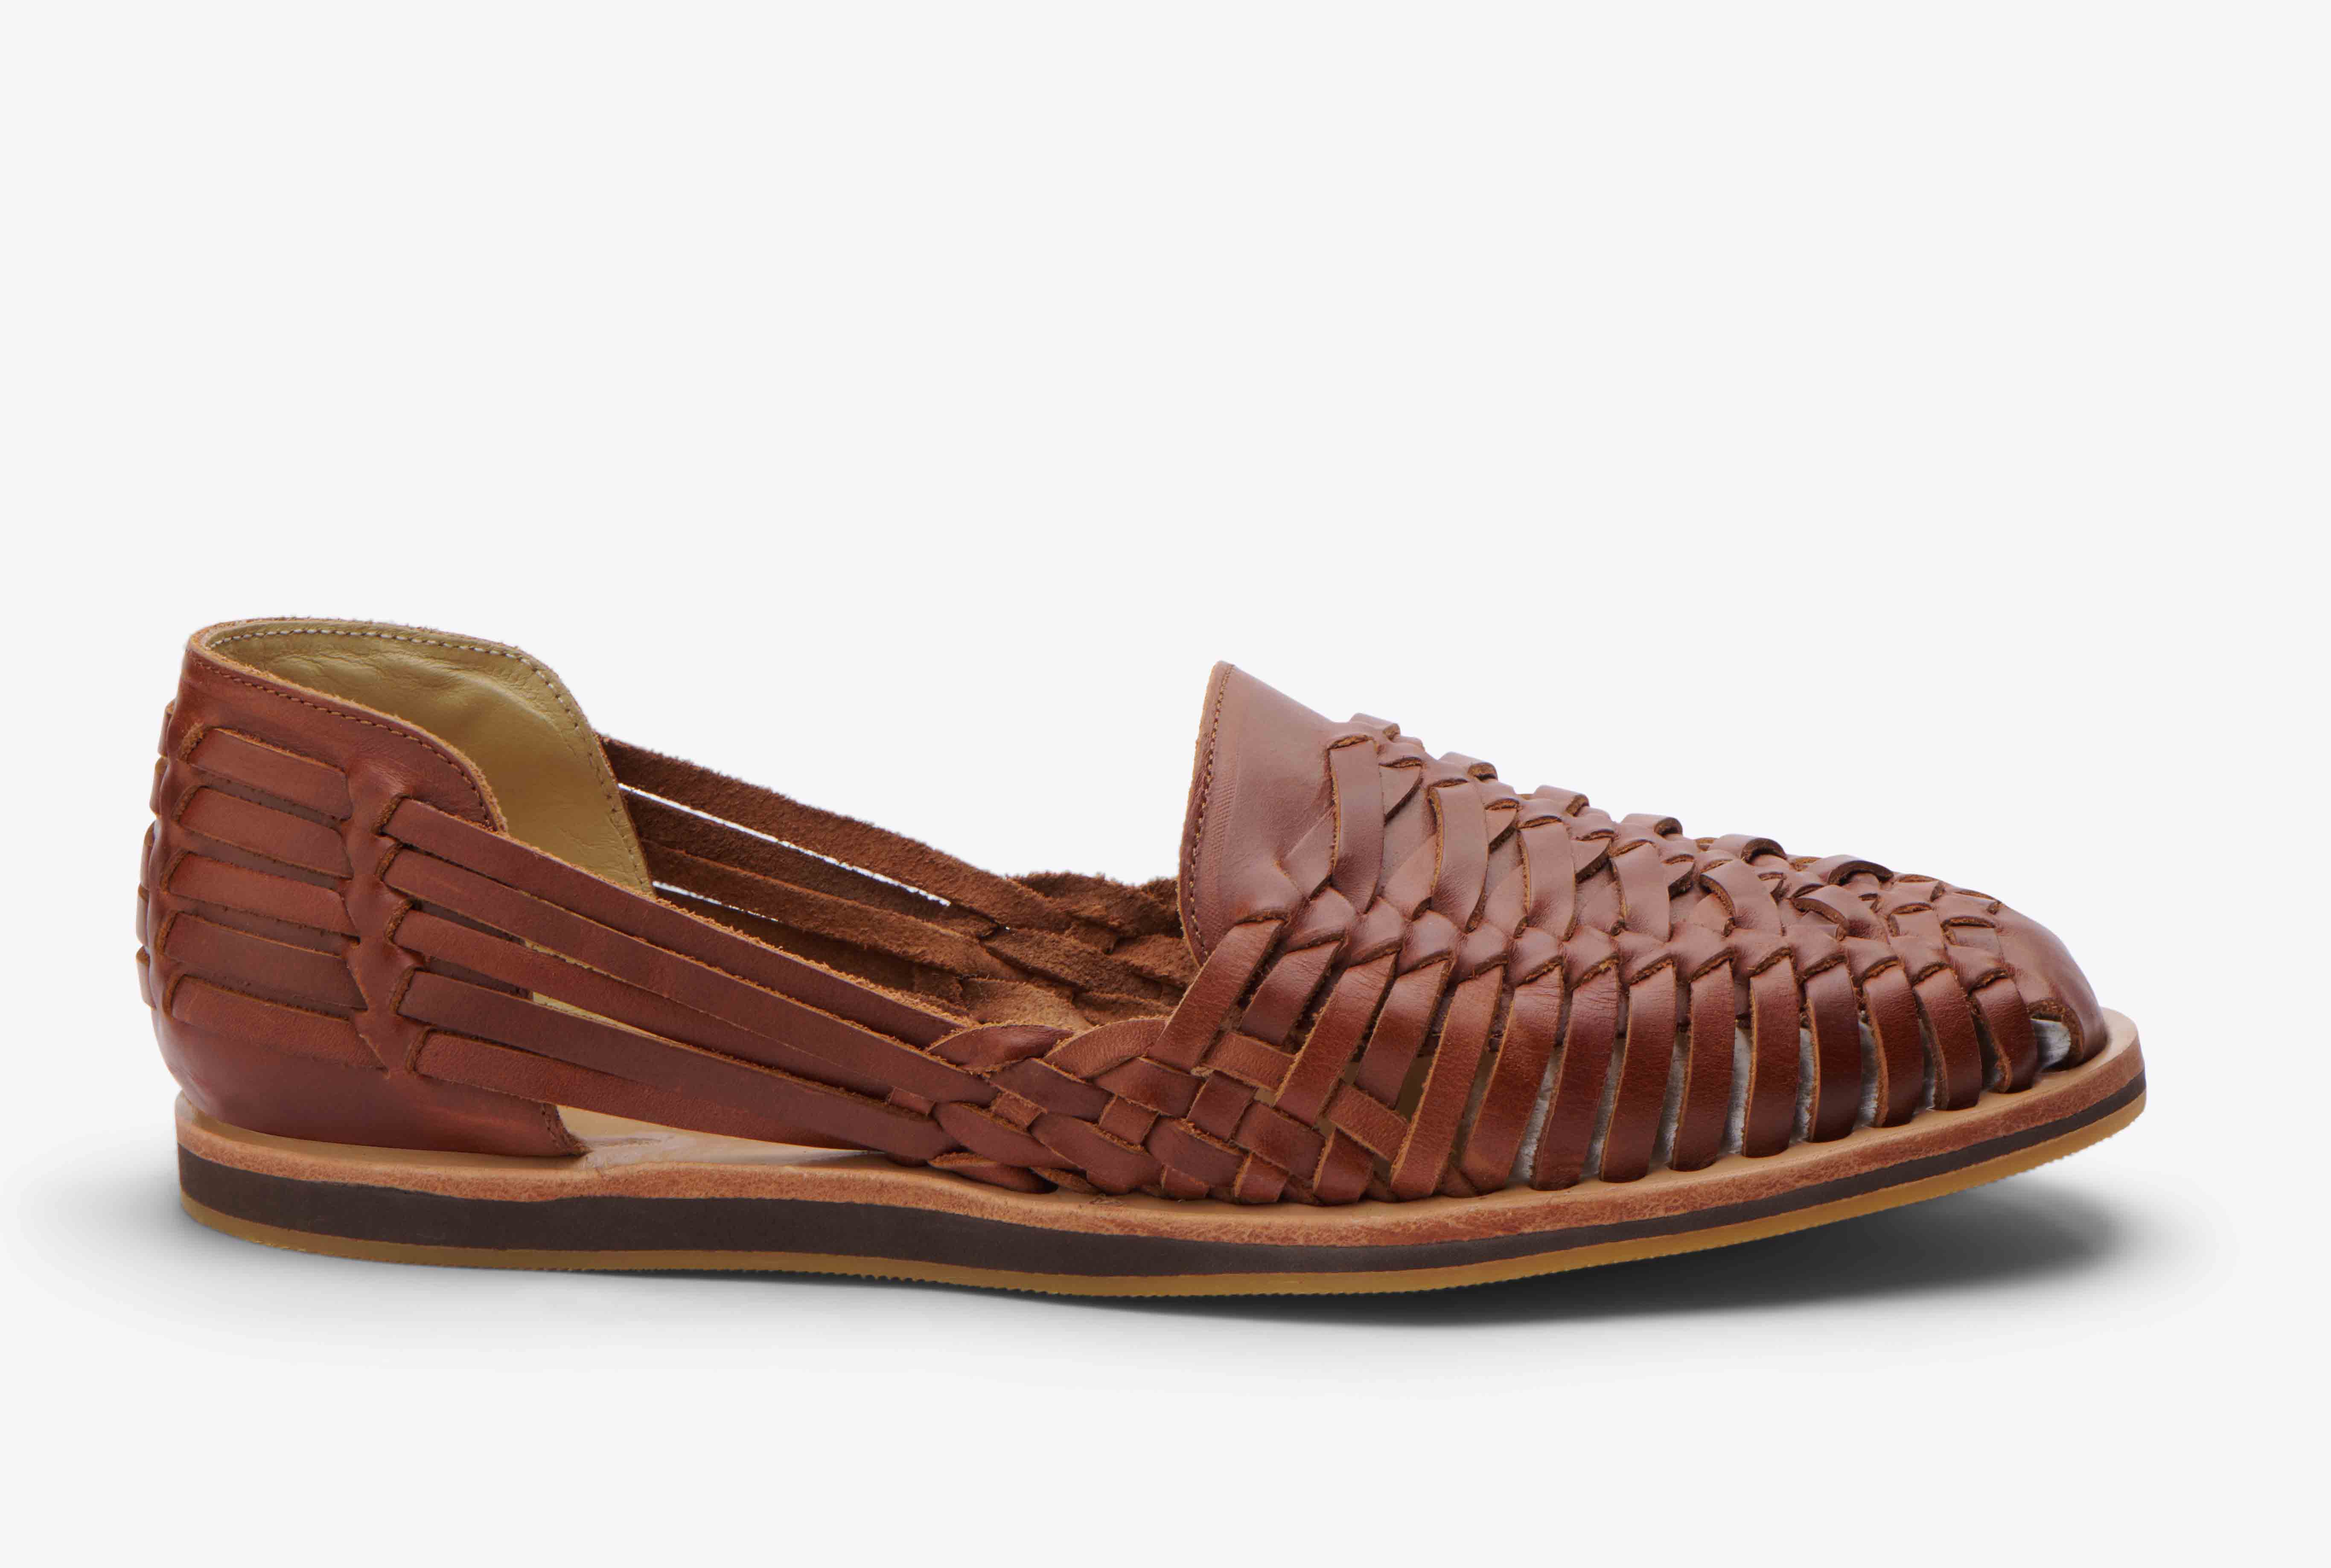 Nisolo Men's Huarache Sandal Brandy - Every Nisolo product is built on the foundation of comfort, function, and design. 